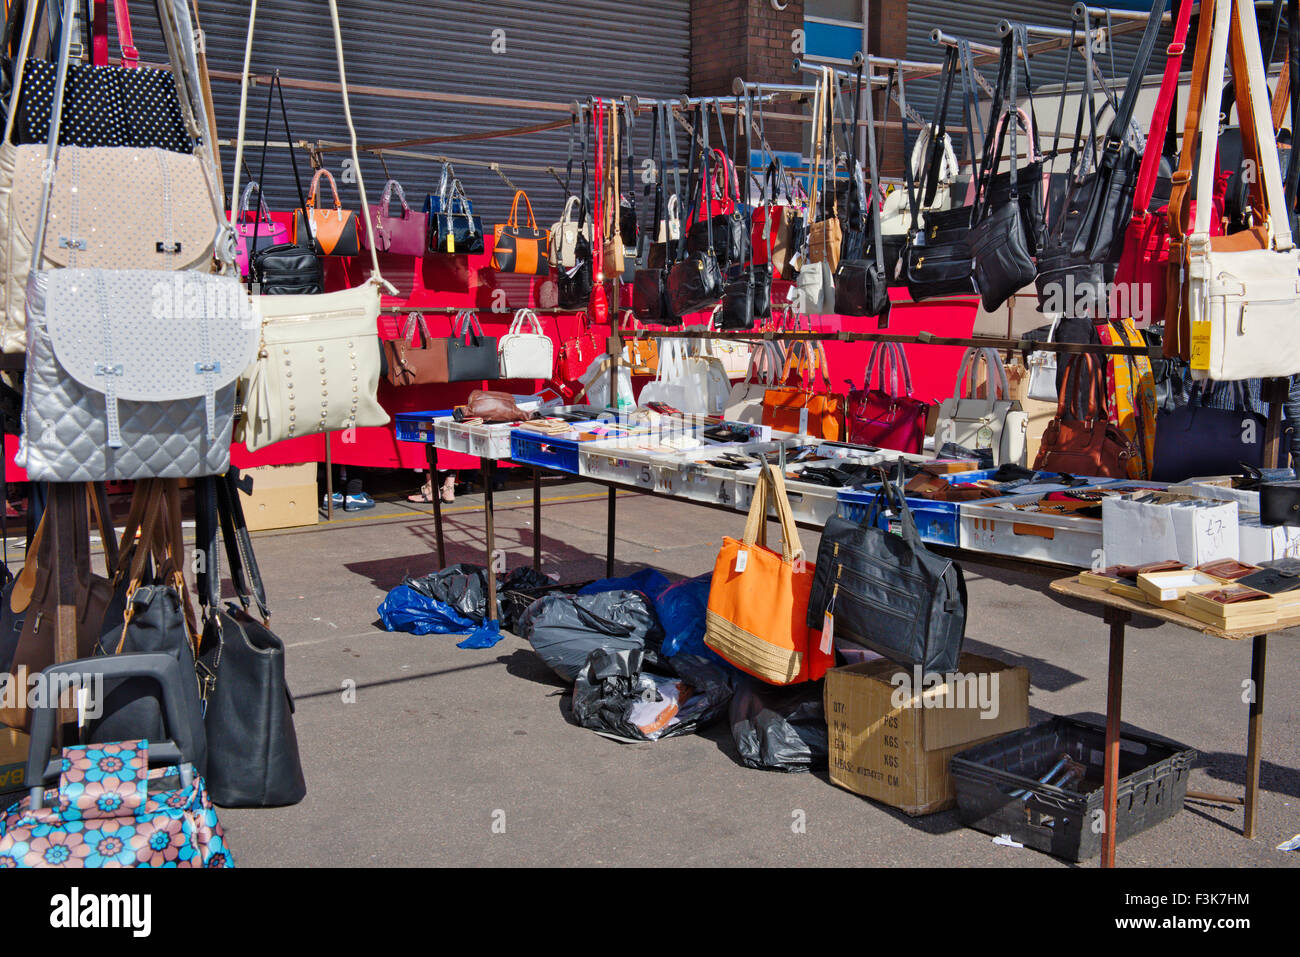 Outdoor market stall selling woman's bags and purses, Bristol, England Stock Photo